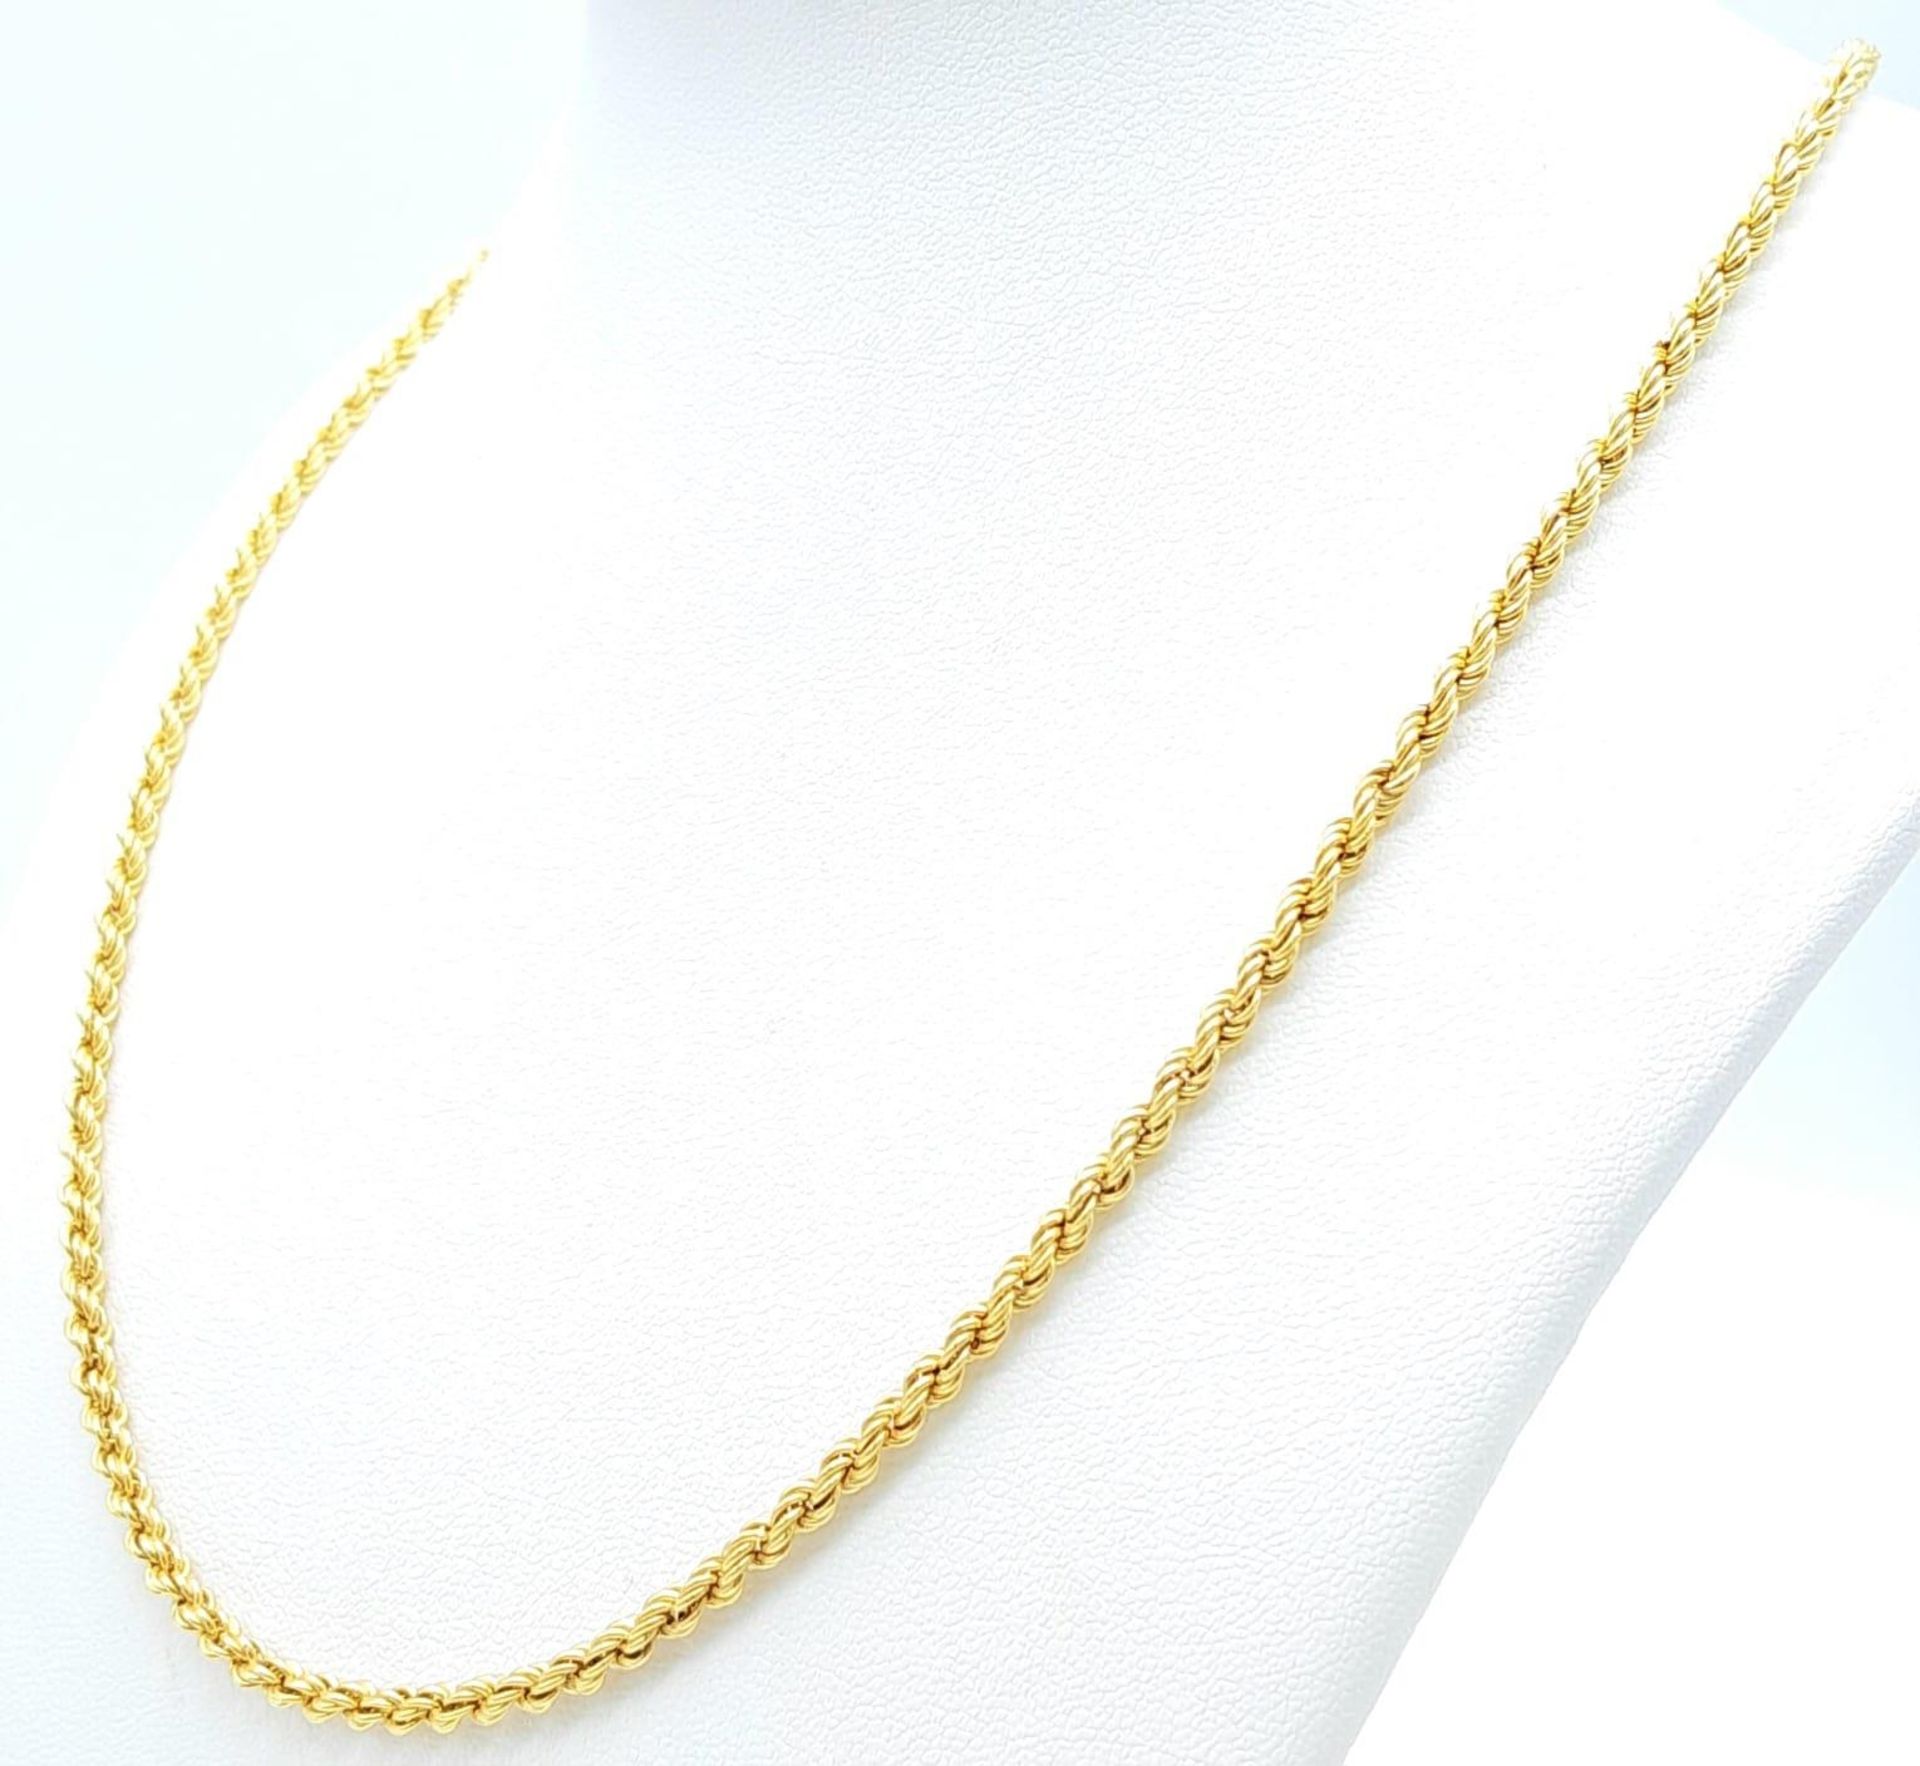 A 9K Yellow Gold Rope Necklace. 60cm length. 6.05g weight. - Image 4 of 6